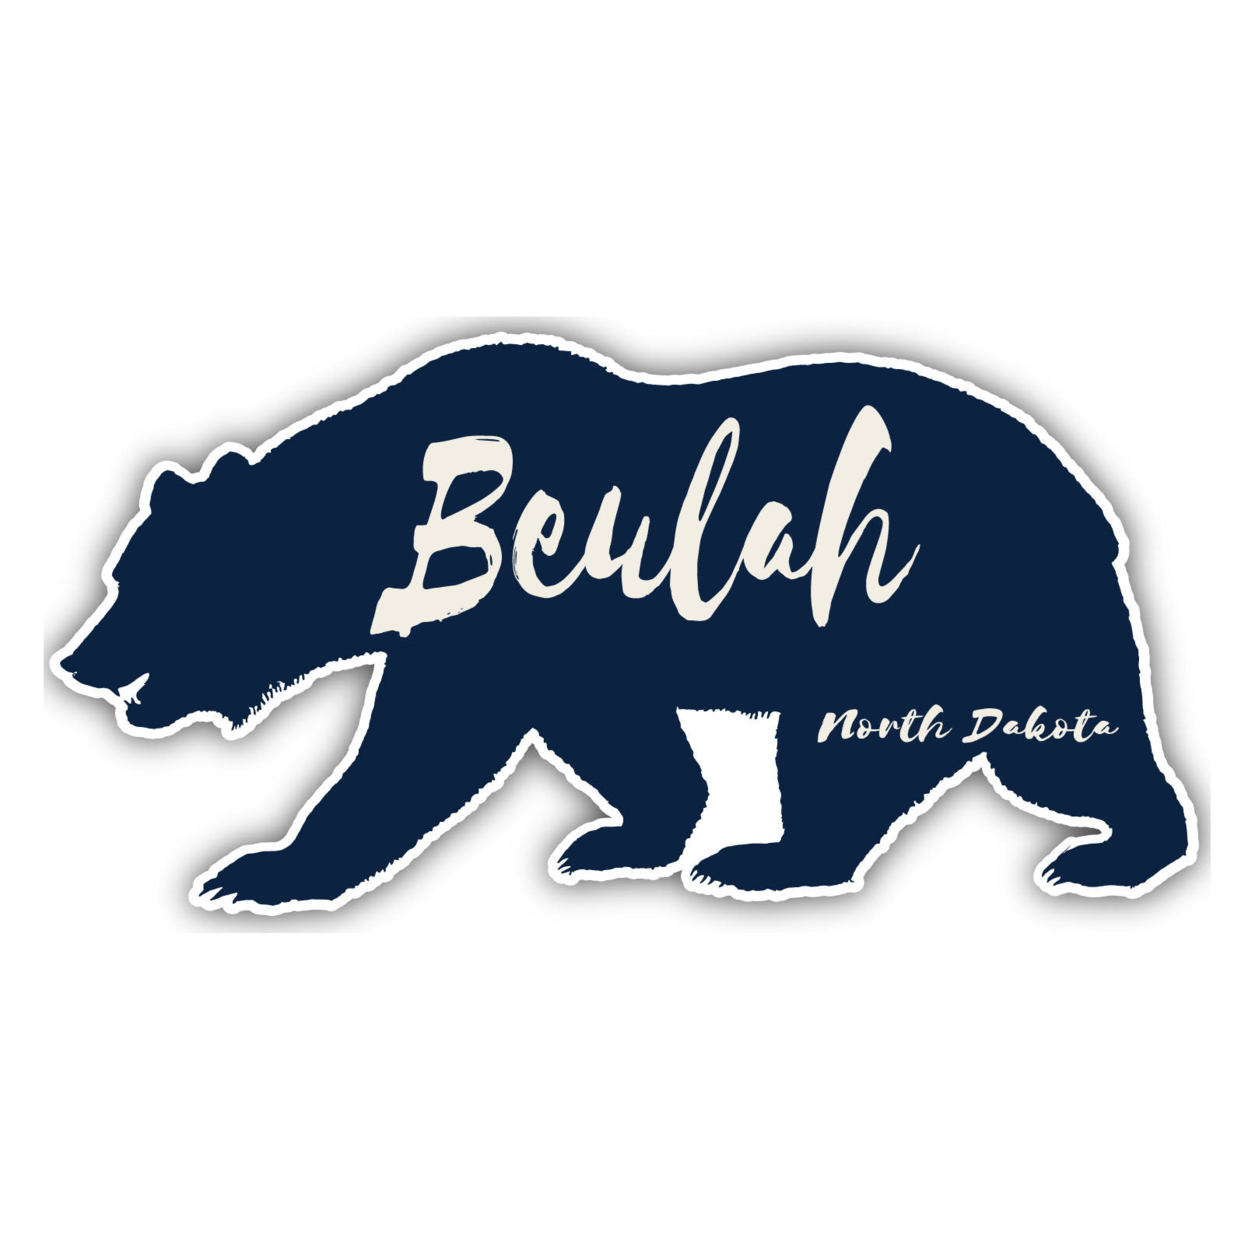 Beulah North Dakota Souvenir Decorative Stickers (Choose Theme And Size) - 4-Pack, 2-Inch, Great Outdoors